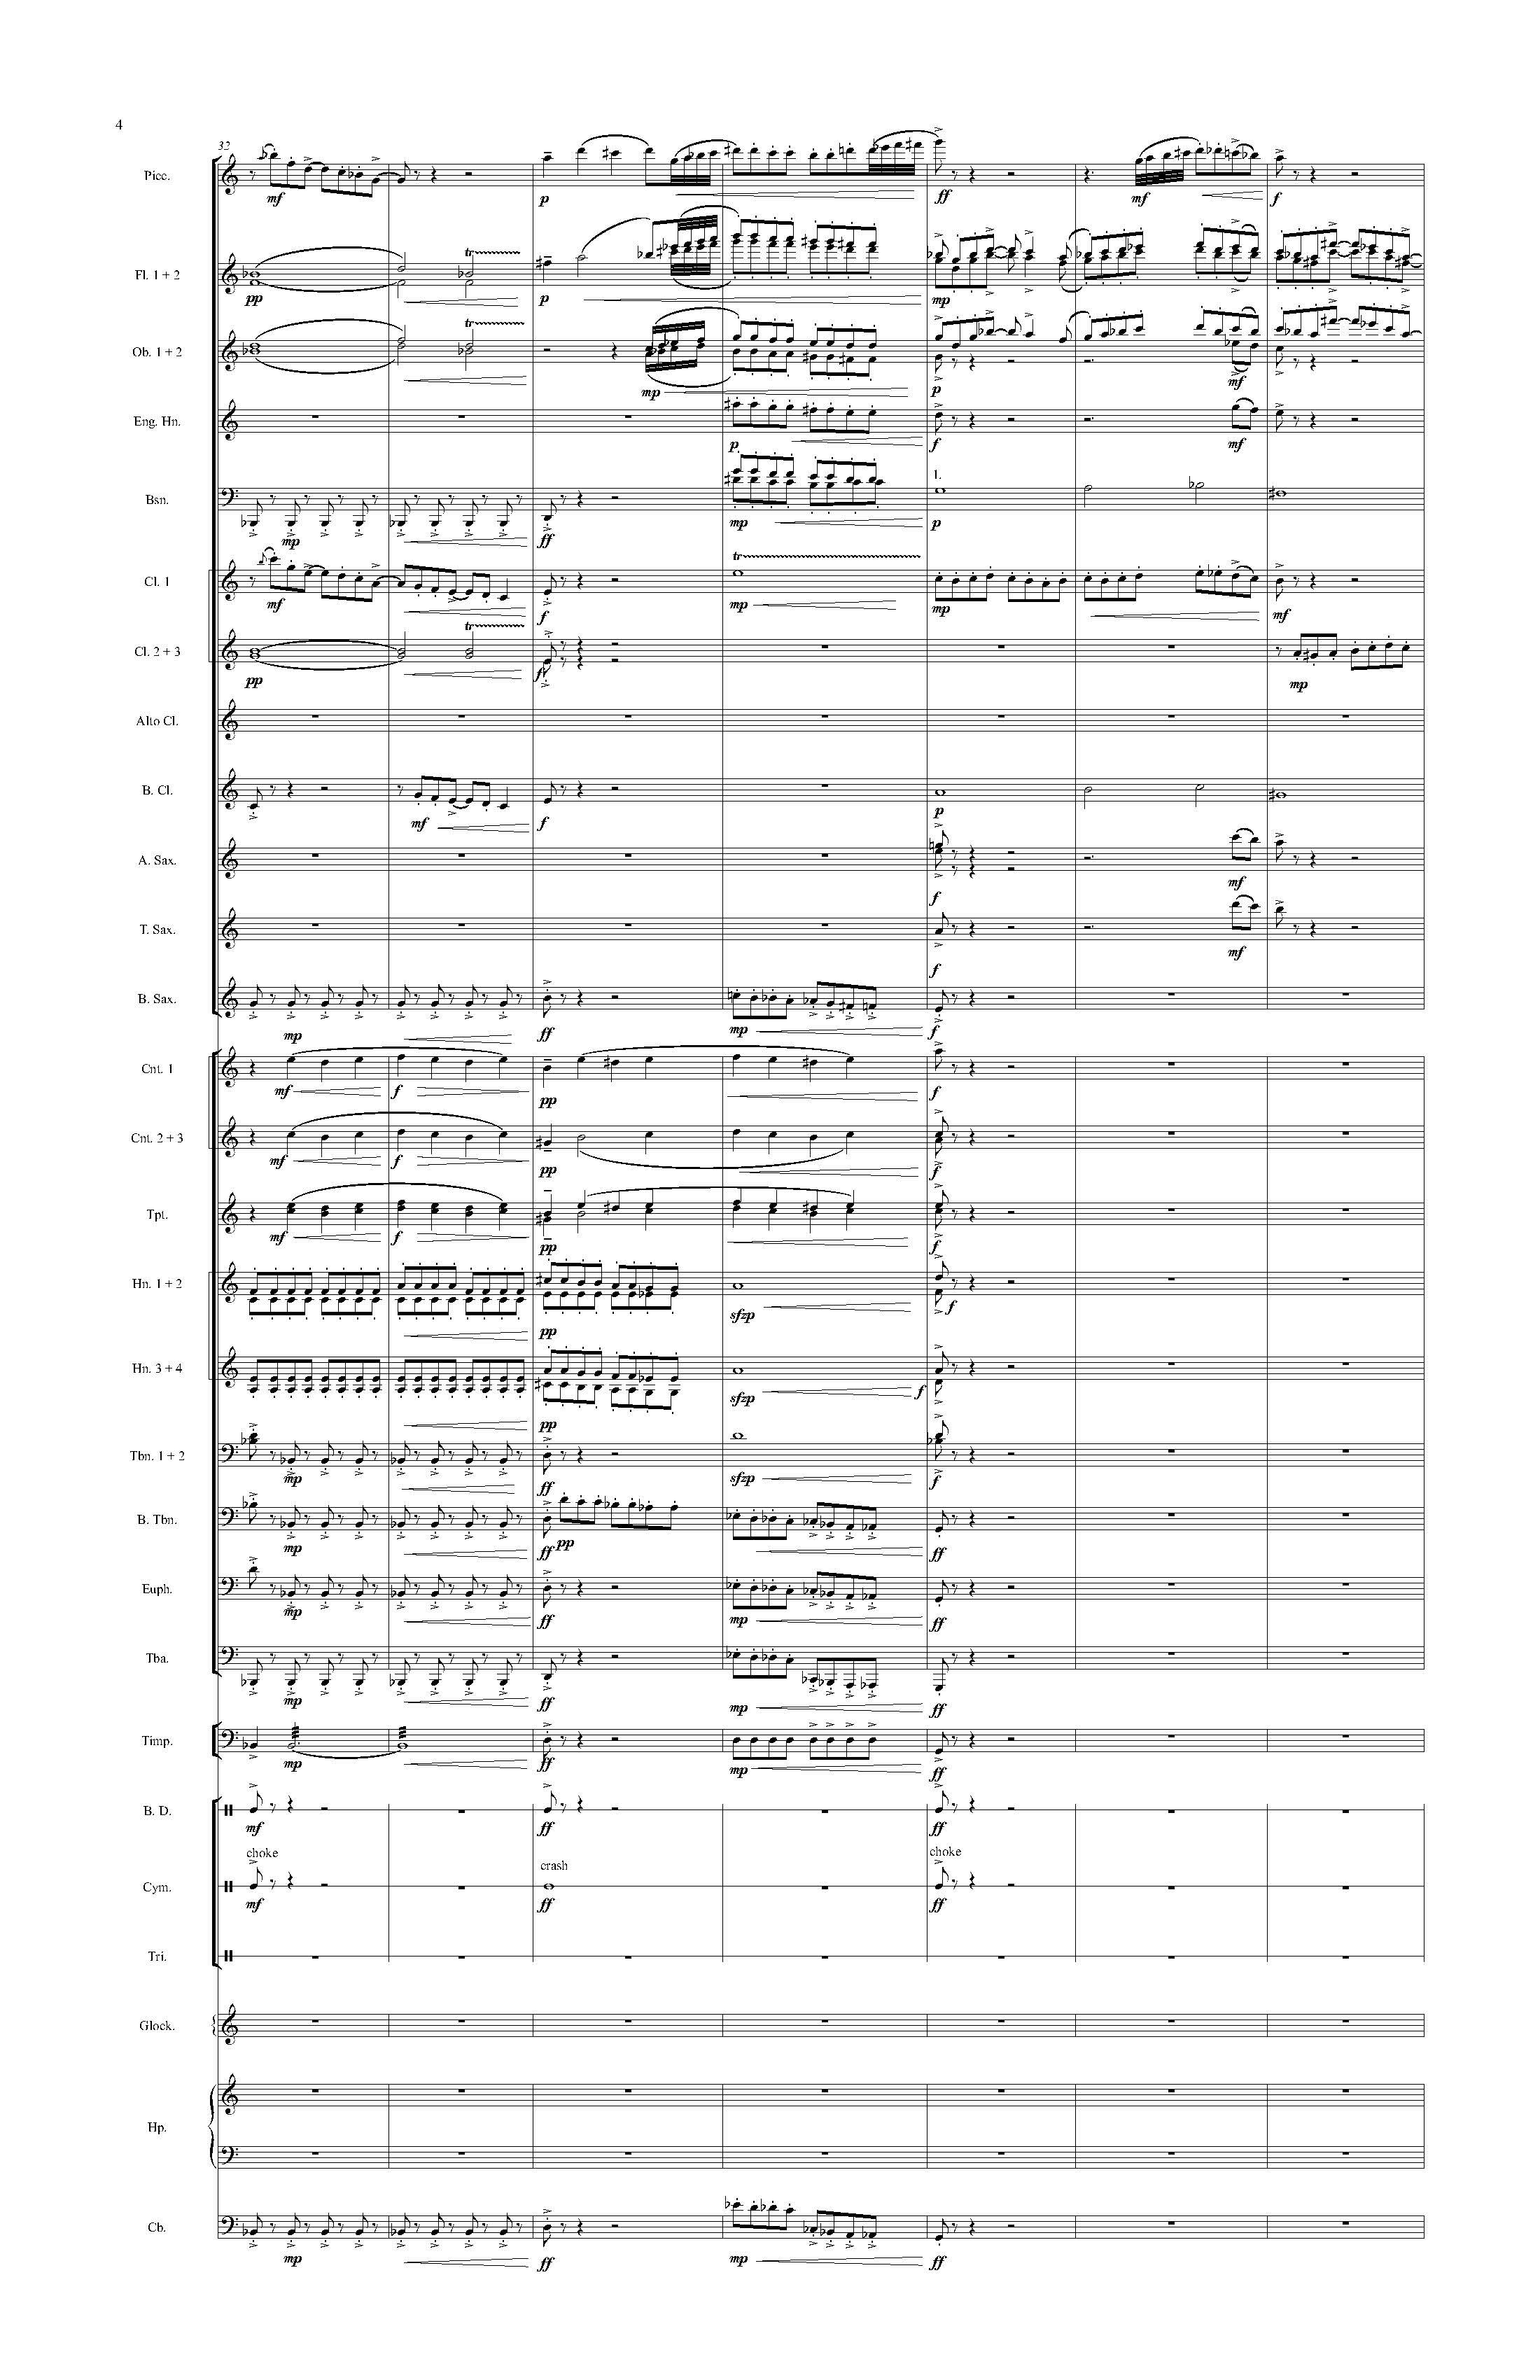 Psyche - Complete Score_Page_10.jpg